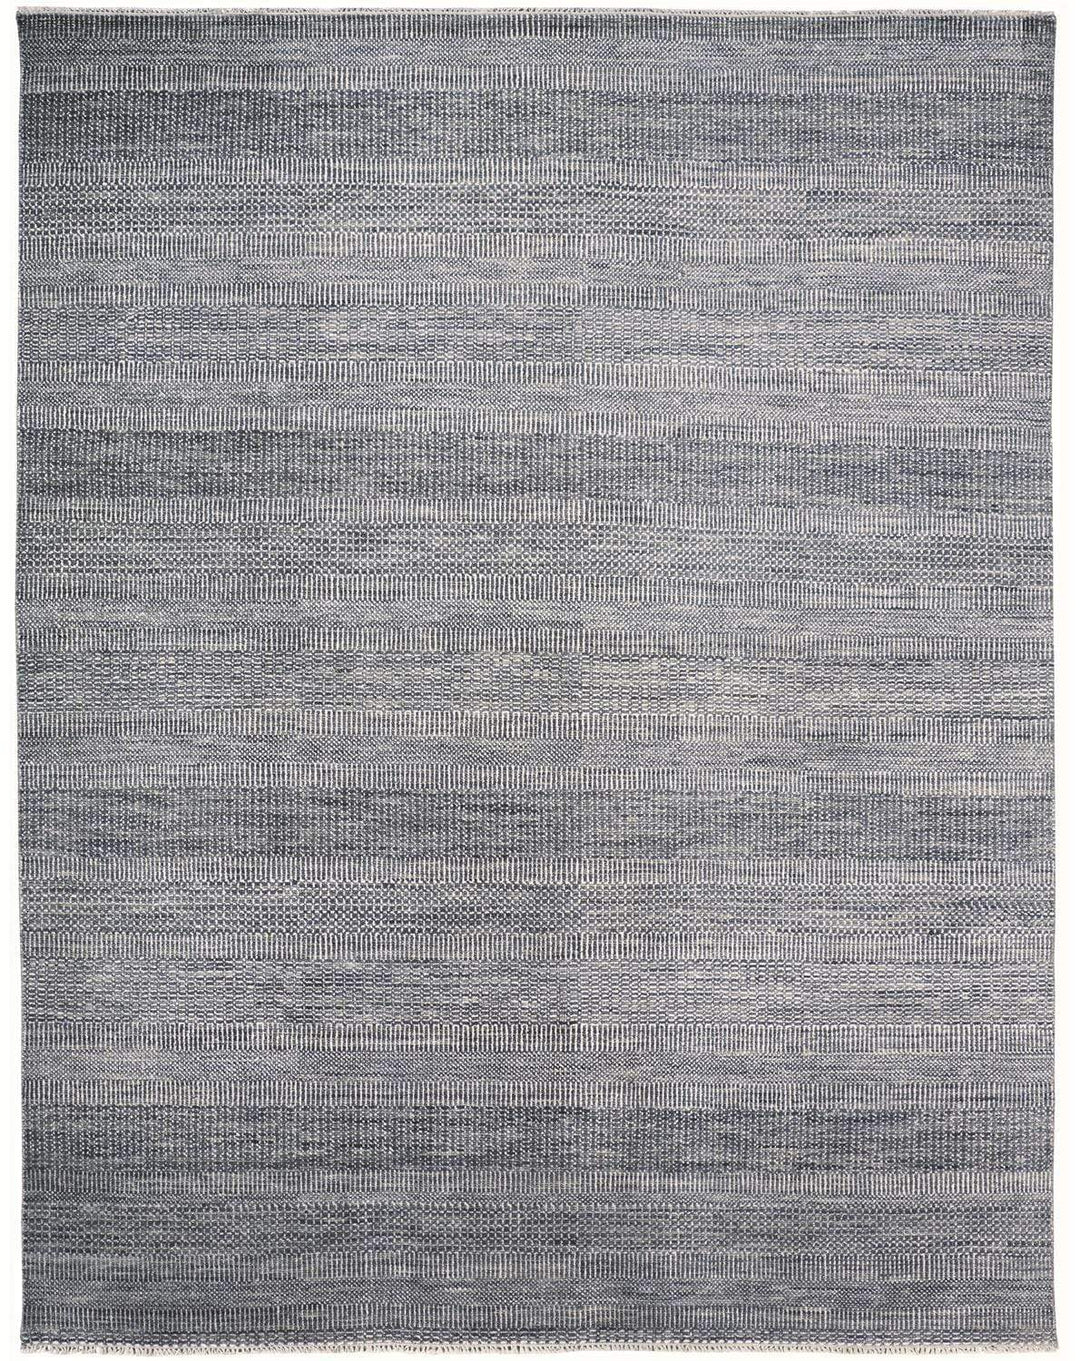 Feizy Feizy Janson Classic Striped Rug - Steel & Silver Gray - Available in 8 Sizes 5'-6" x 8'-6" I92I6063GRYSLVE50